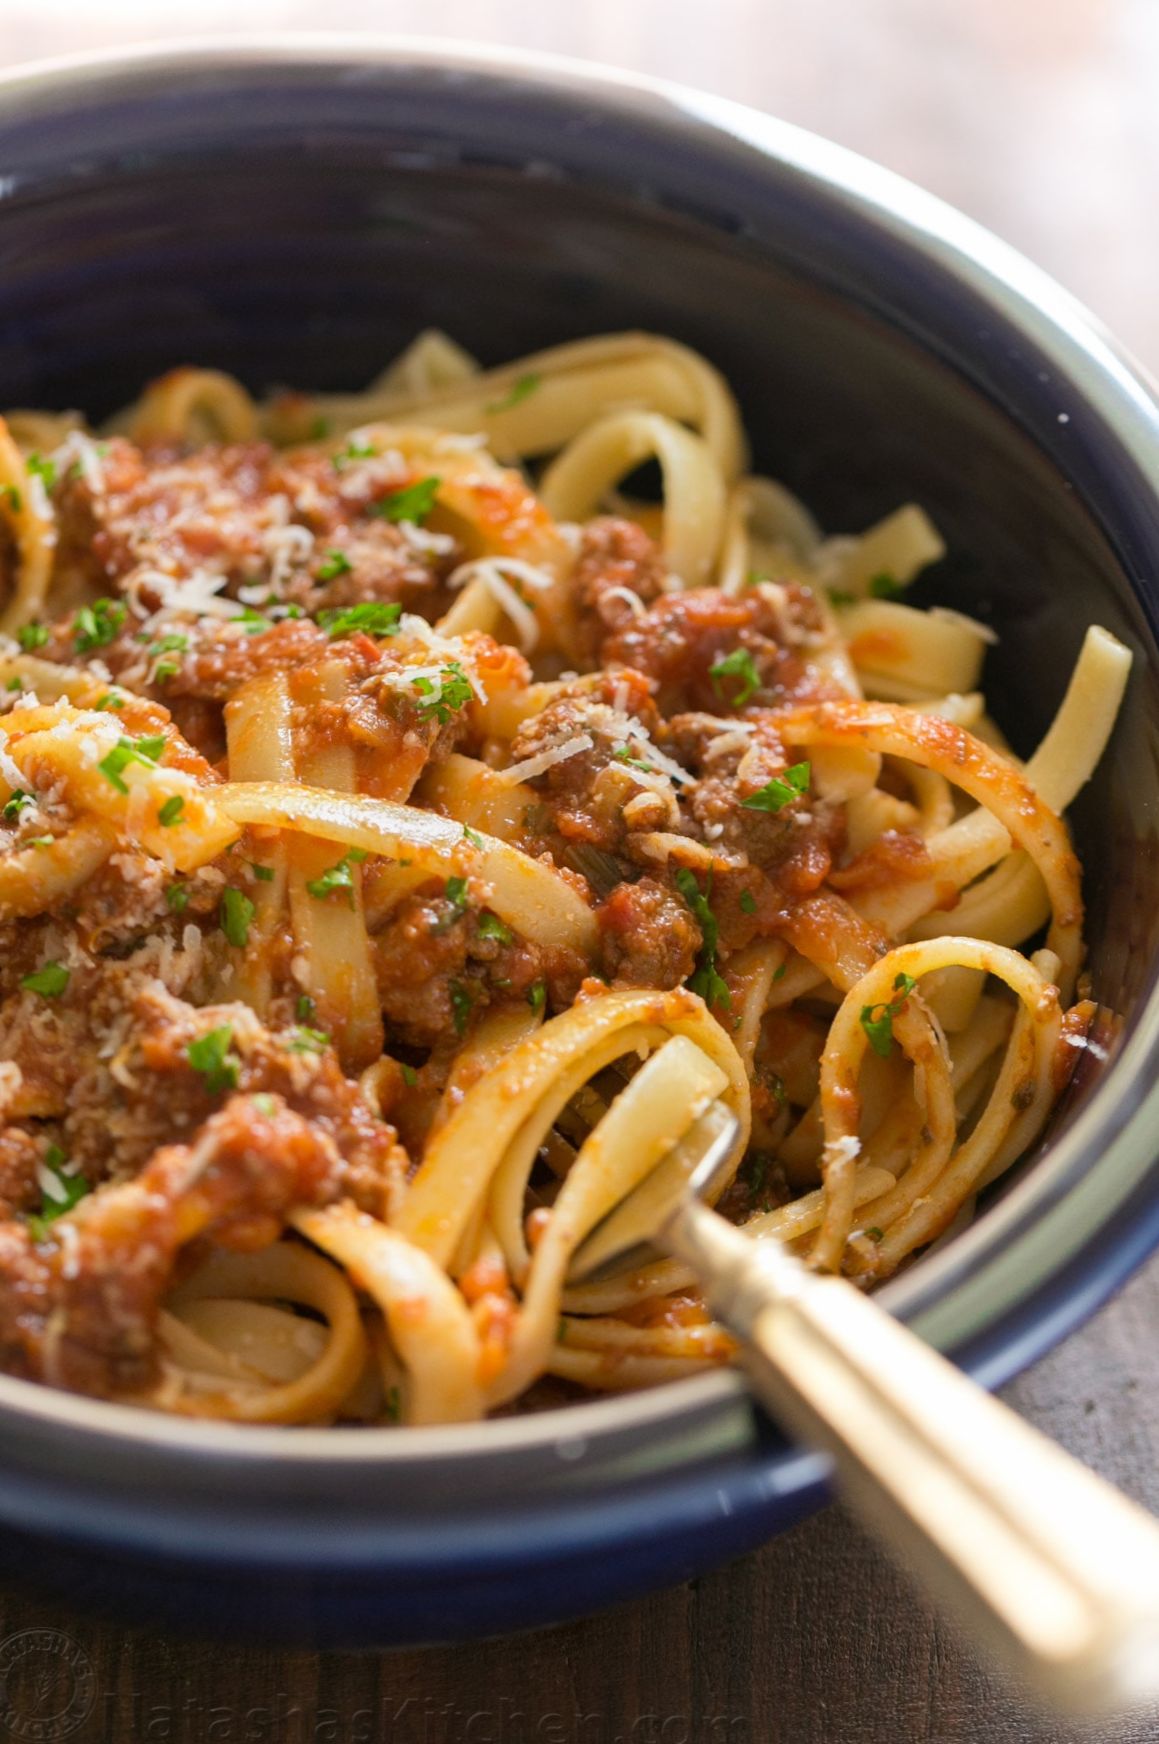 Slow-cooked Bolognese